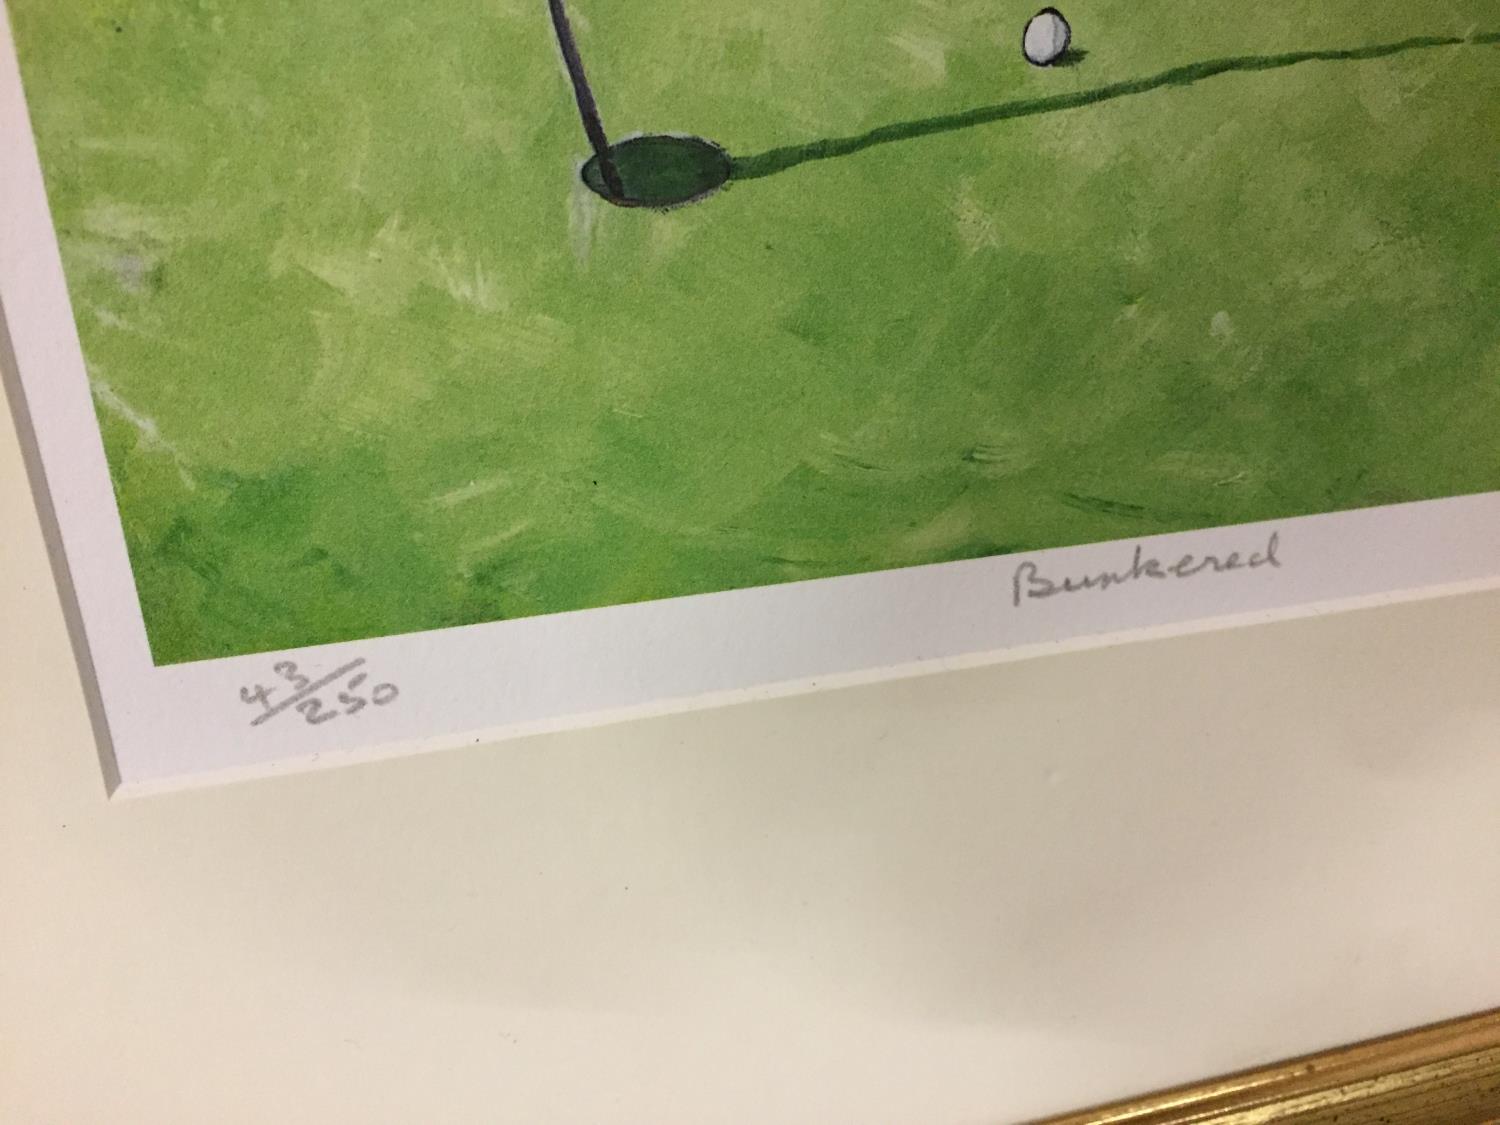 A GILT FRAMED LIMITED EDITION LIZ TAYLOR WEBB PICTURE 'BUNKERED' PENCIL SIGNED TO LOWER RIGHT HAND - Image 3 of 4